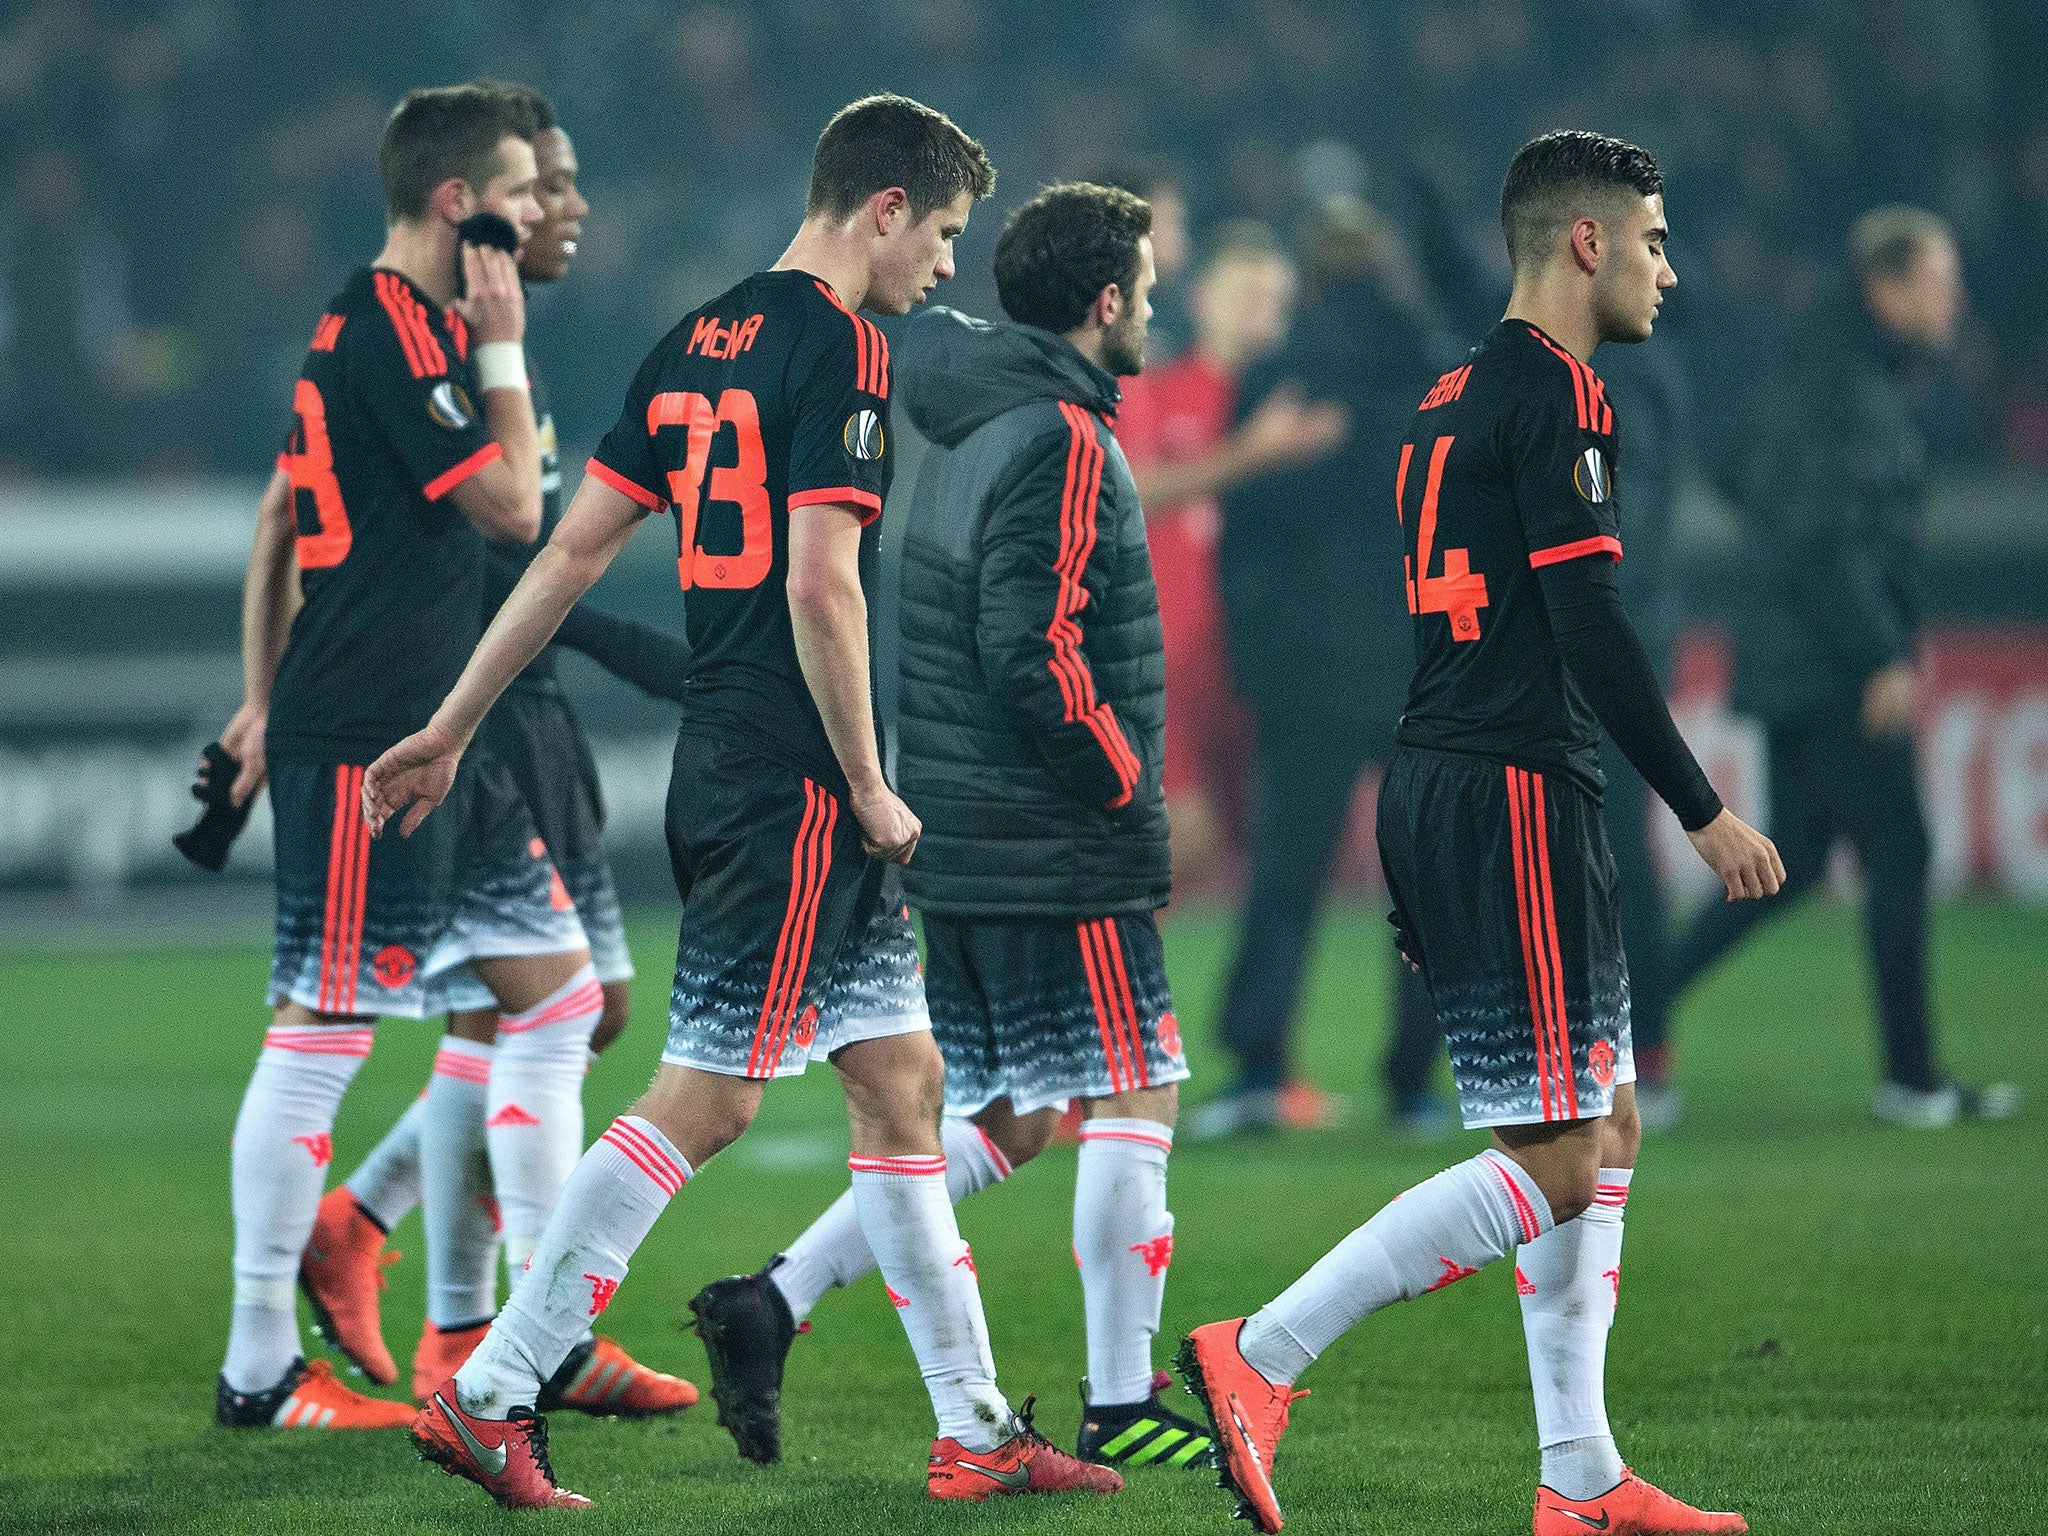 The Manchester United players look dejected after defeat